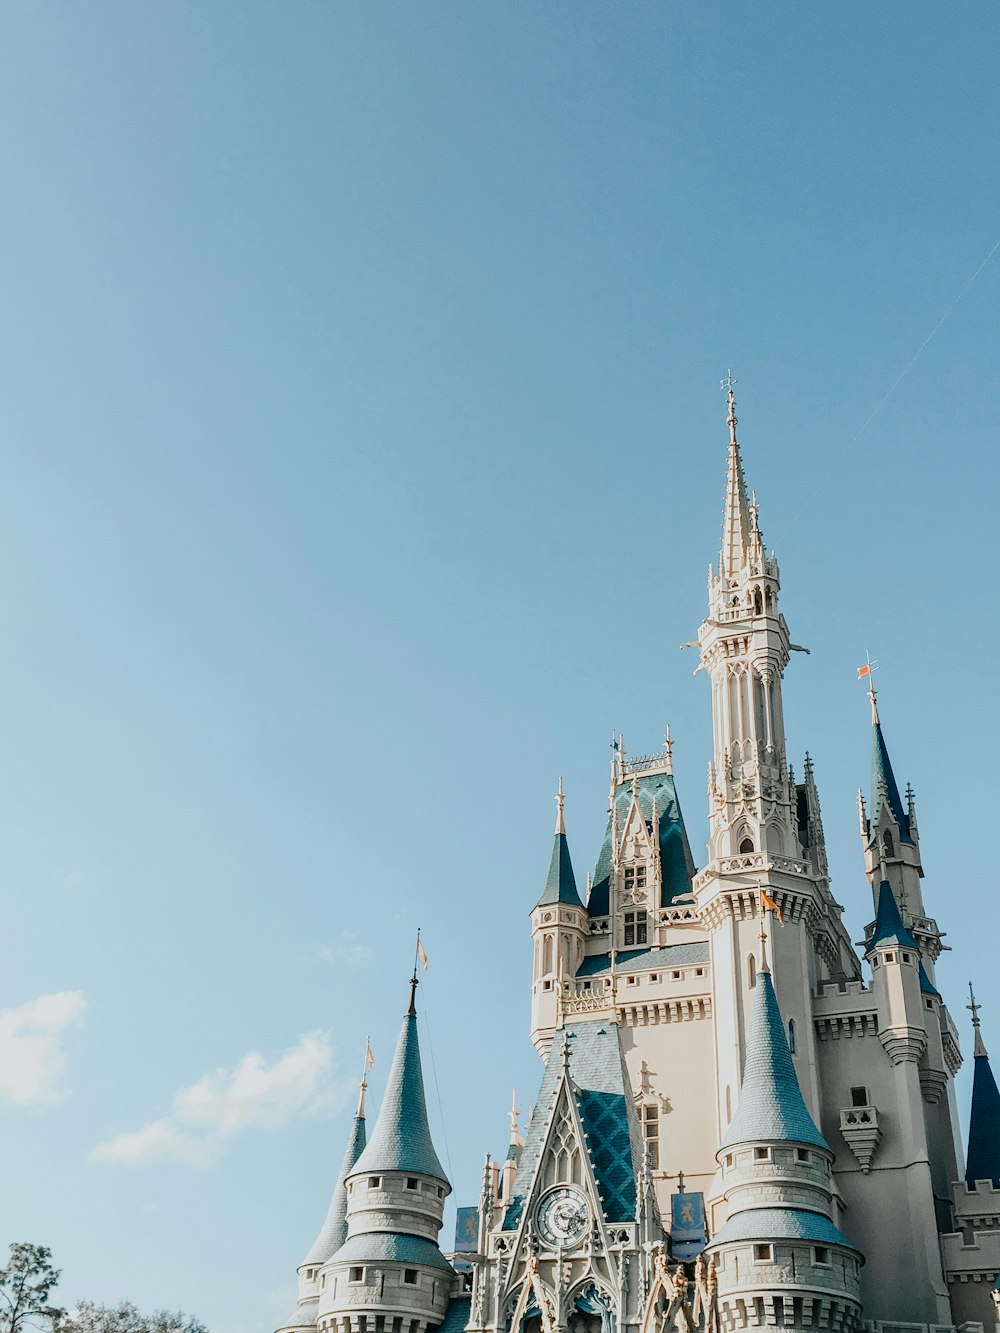 Cinderella's castle during clear blue sky